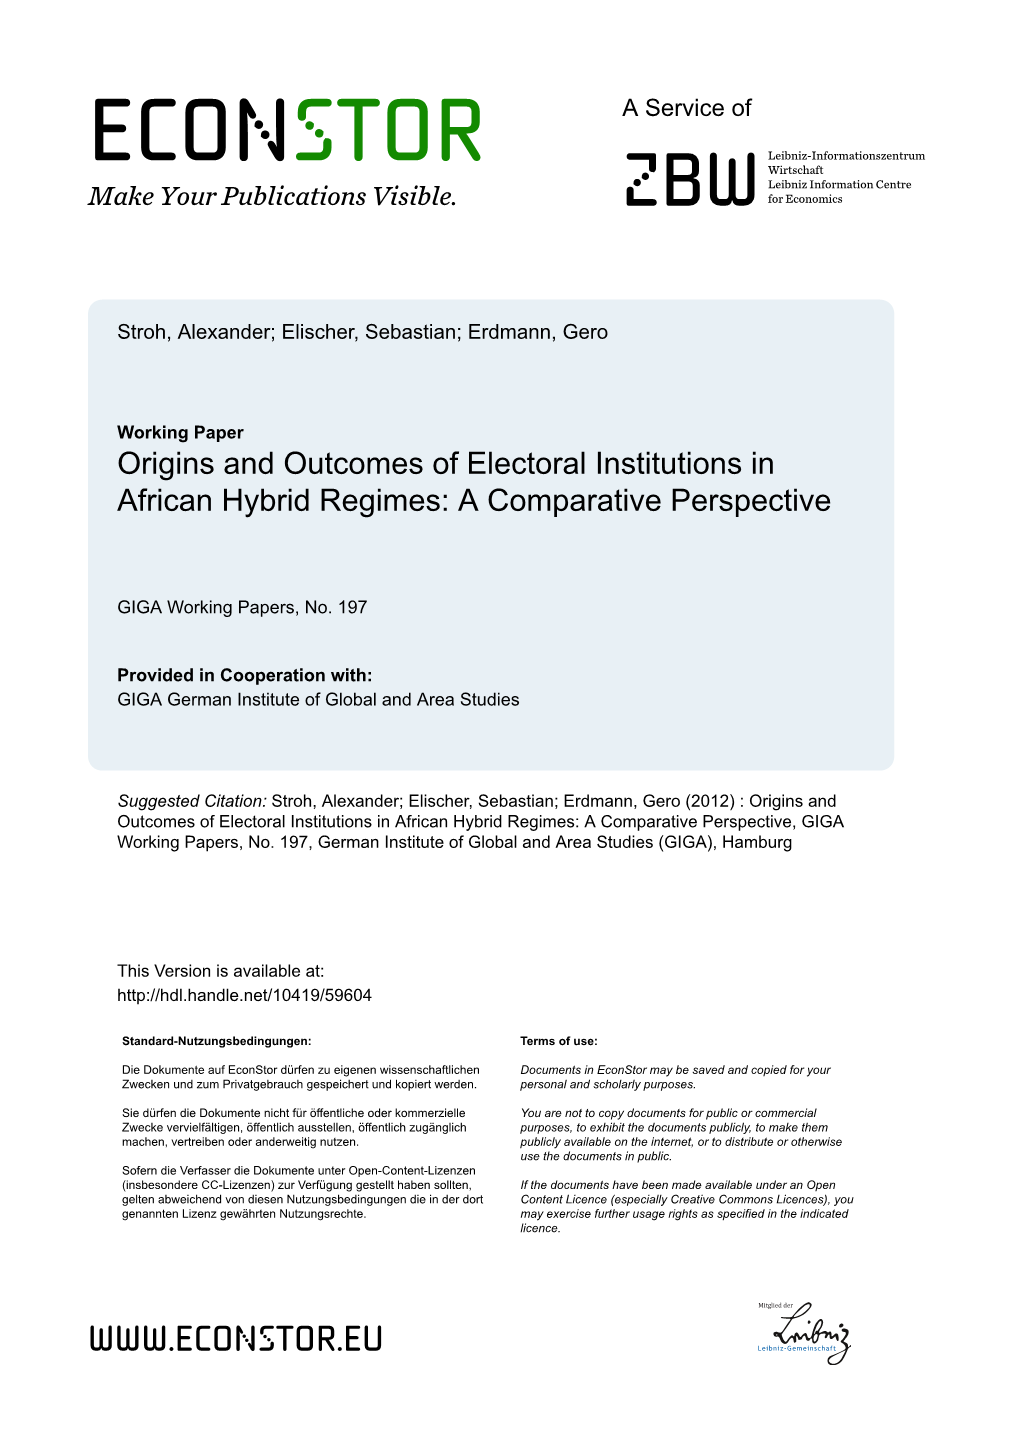 Origins and Outcomes of Electoral Institutions in African Hybrid Regimes: a Comparative Perspective